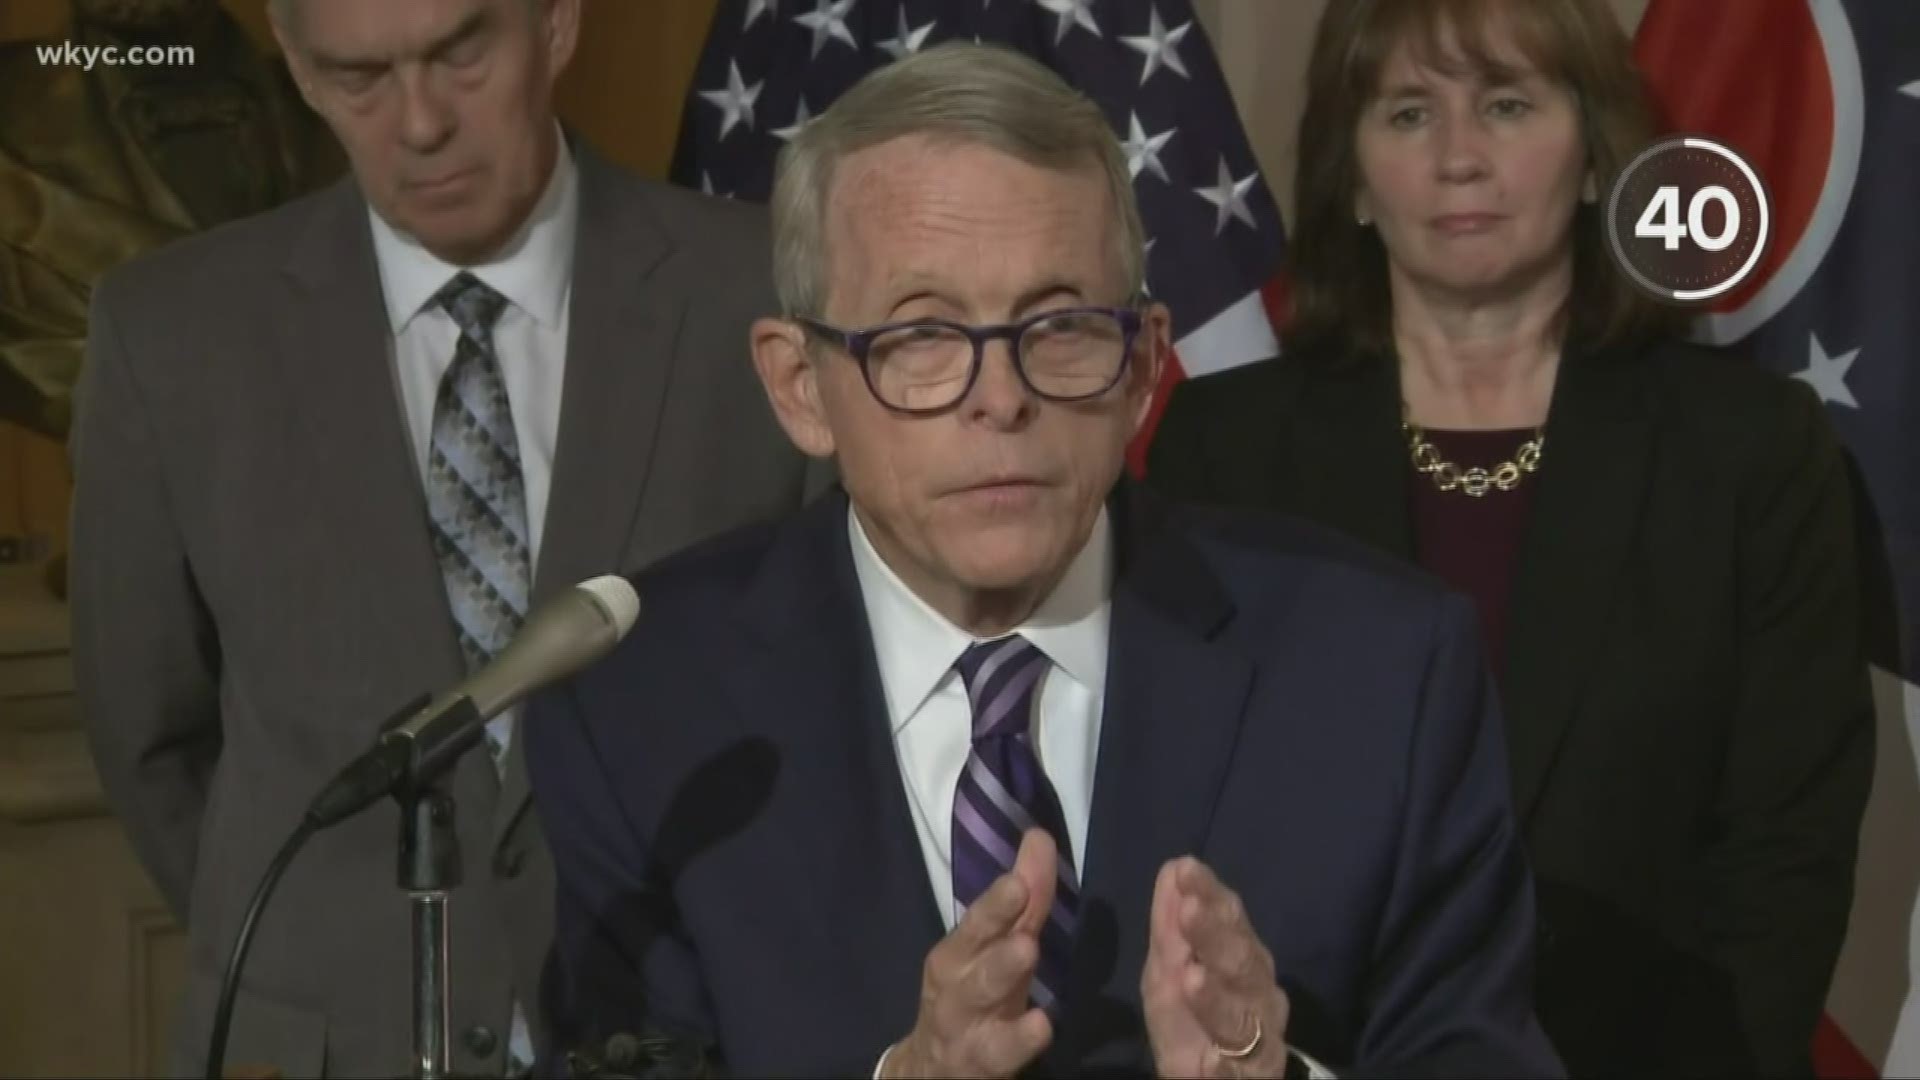 Ohio Gov. Mike DeWine has asked lawmakers to ban the sale of flavored e-cigarette products. Concerns continue to grow about the health effects of vaping.